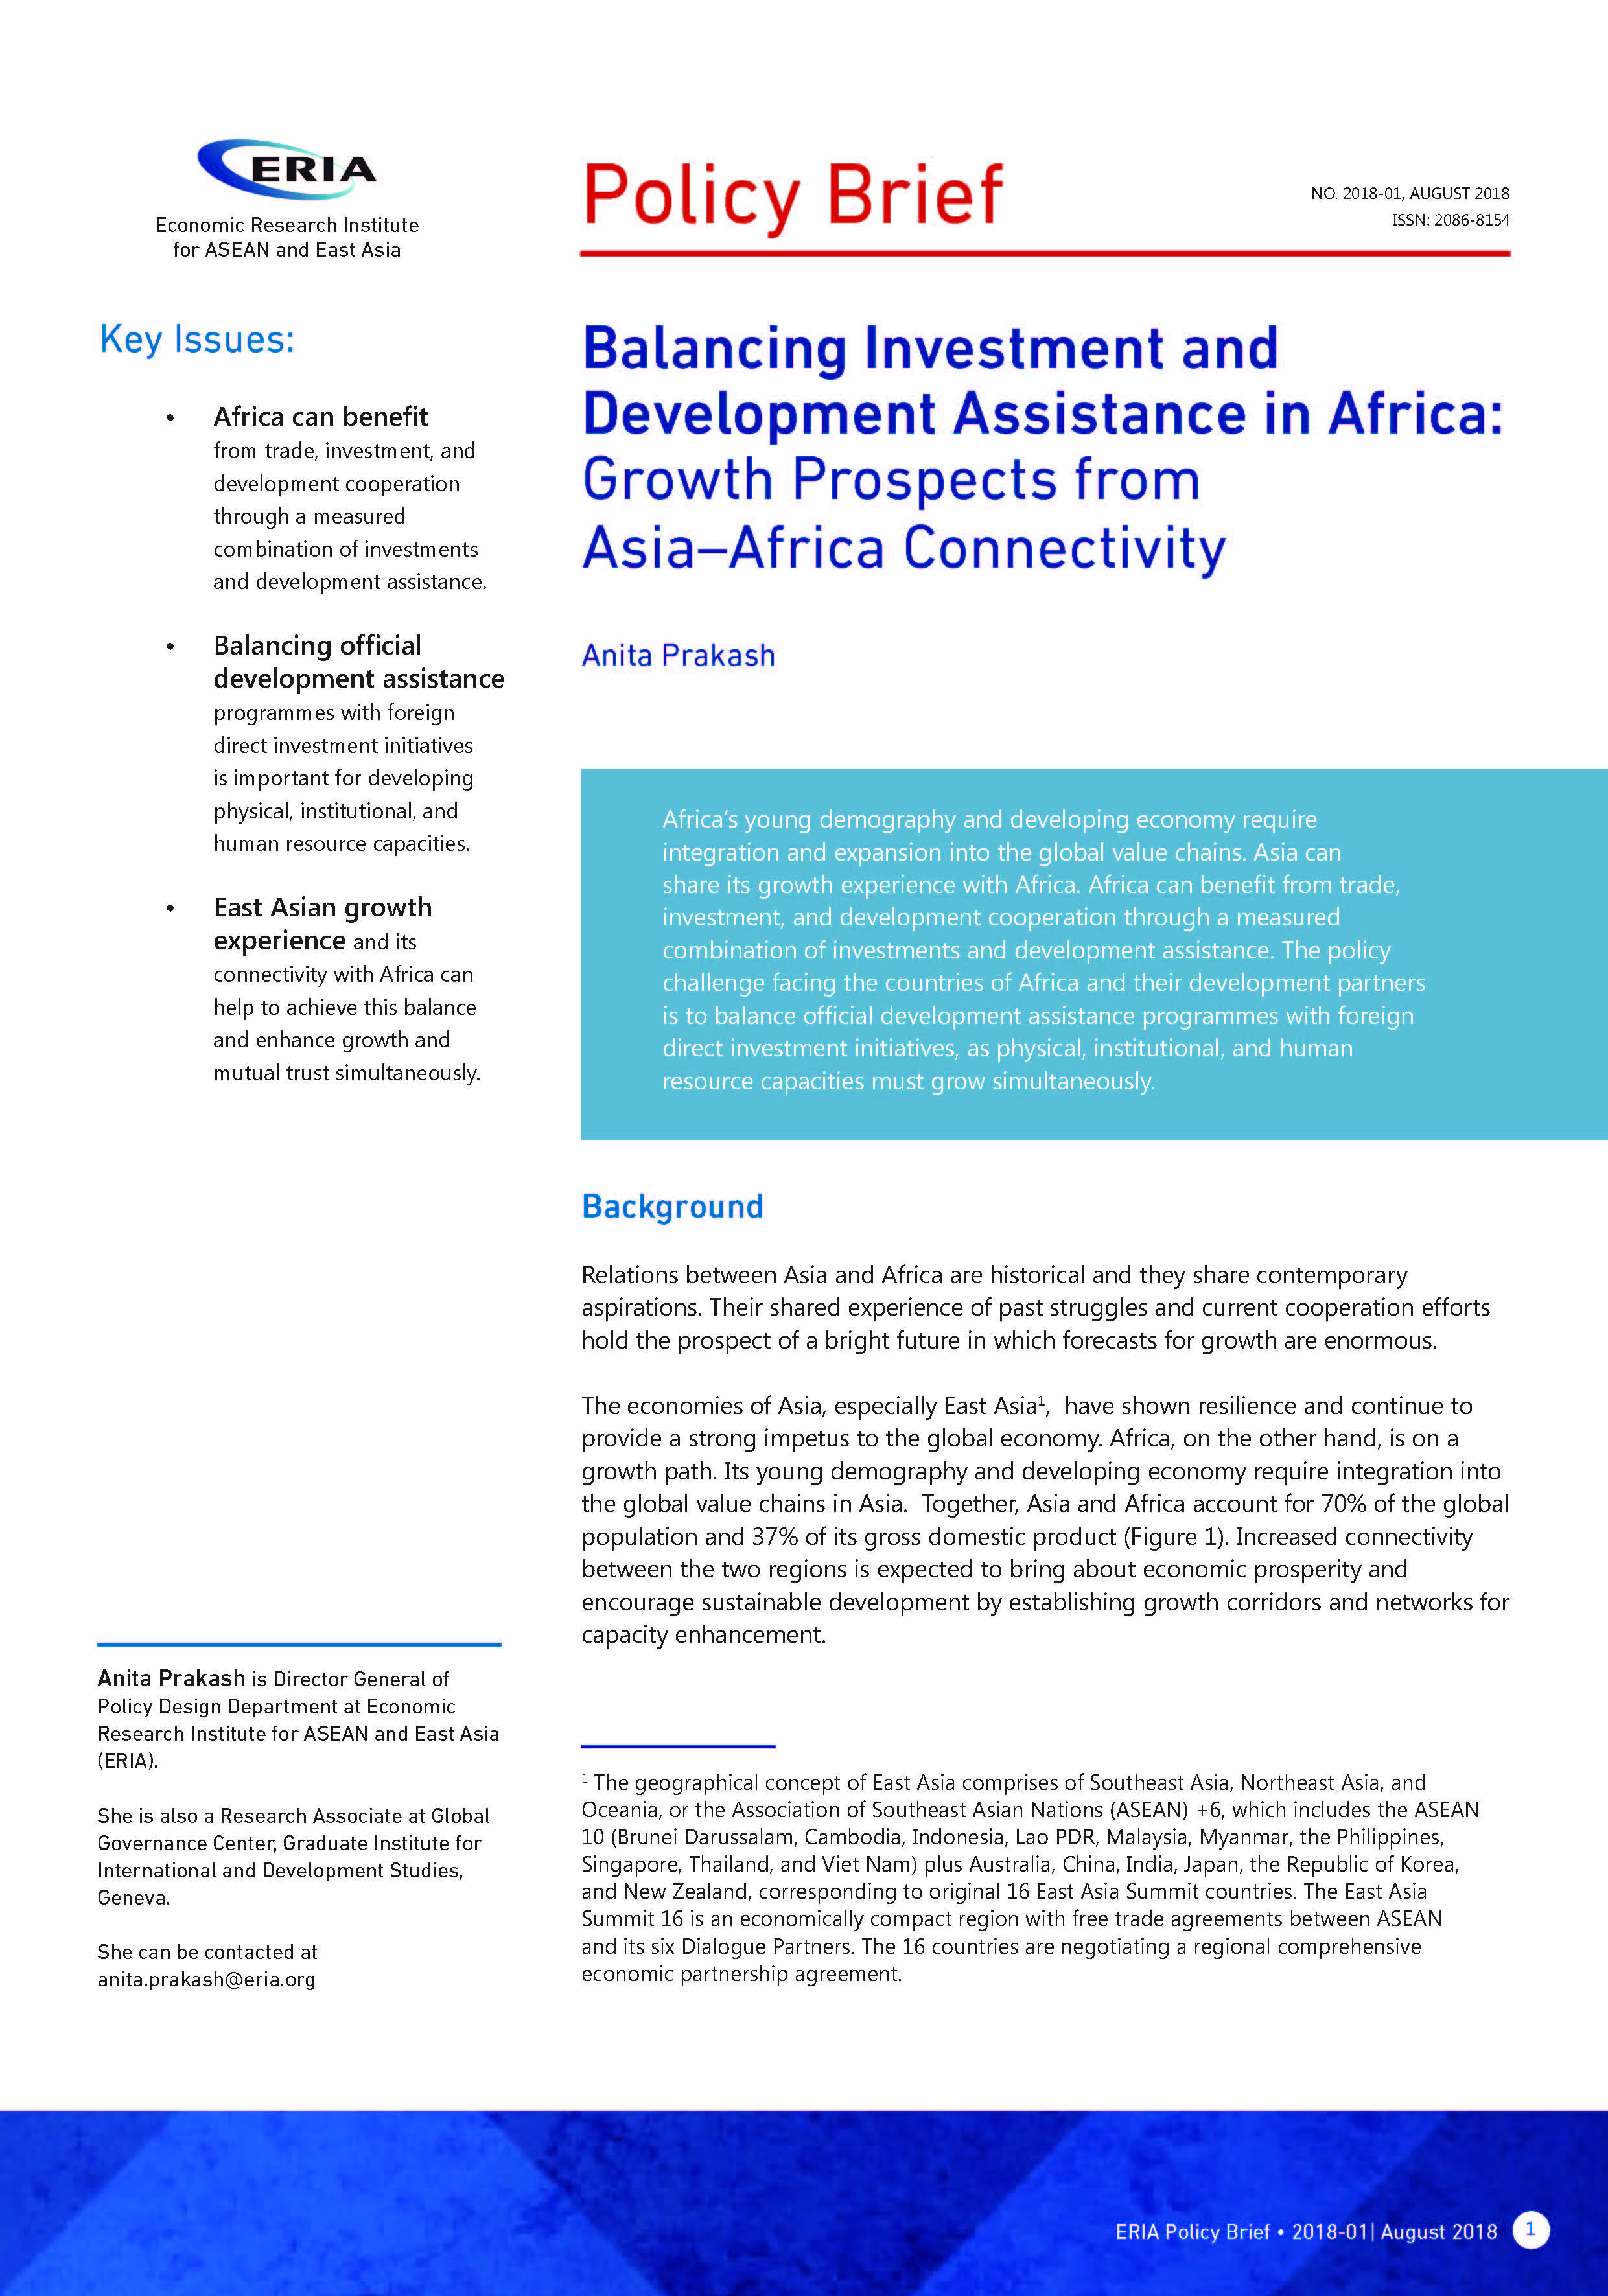 Balancing Investment and Development Assistance in Africa: Growth Prospects from Asia-Africa Connectivity